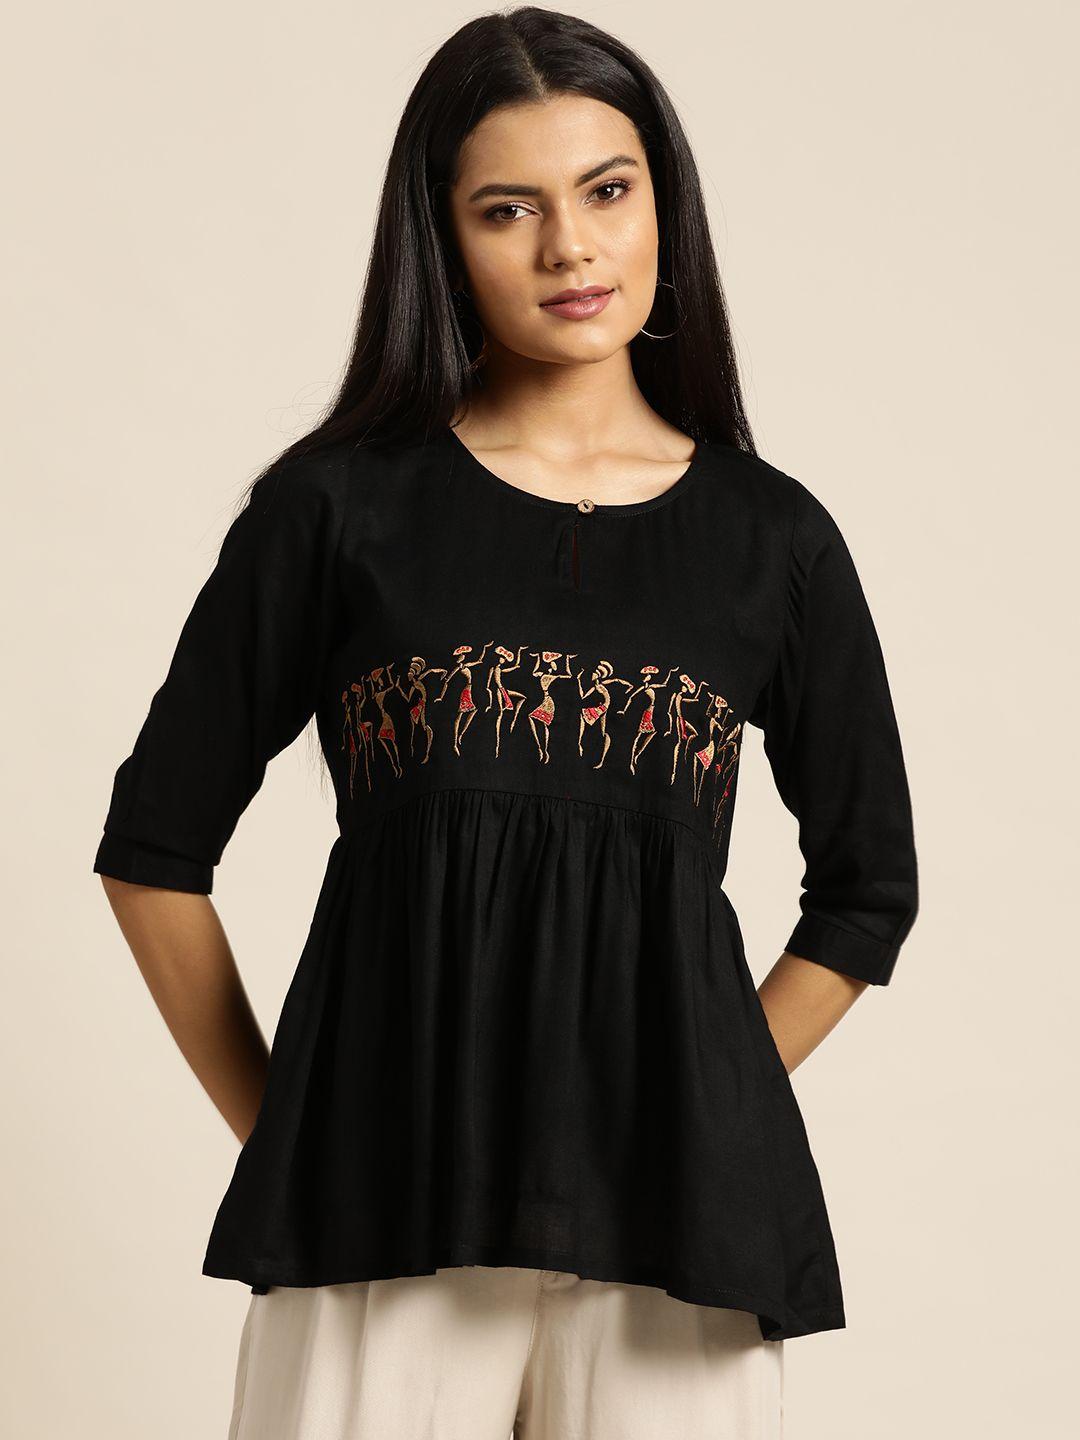 shae-by-sassafras-black-&-red-embroidered-liva-a-line-top